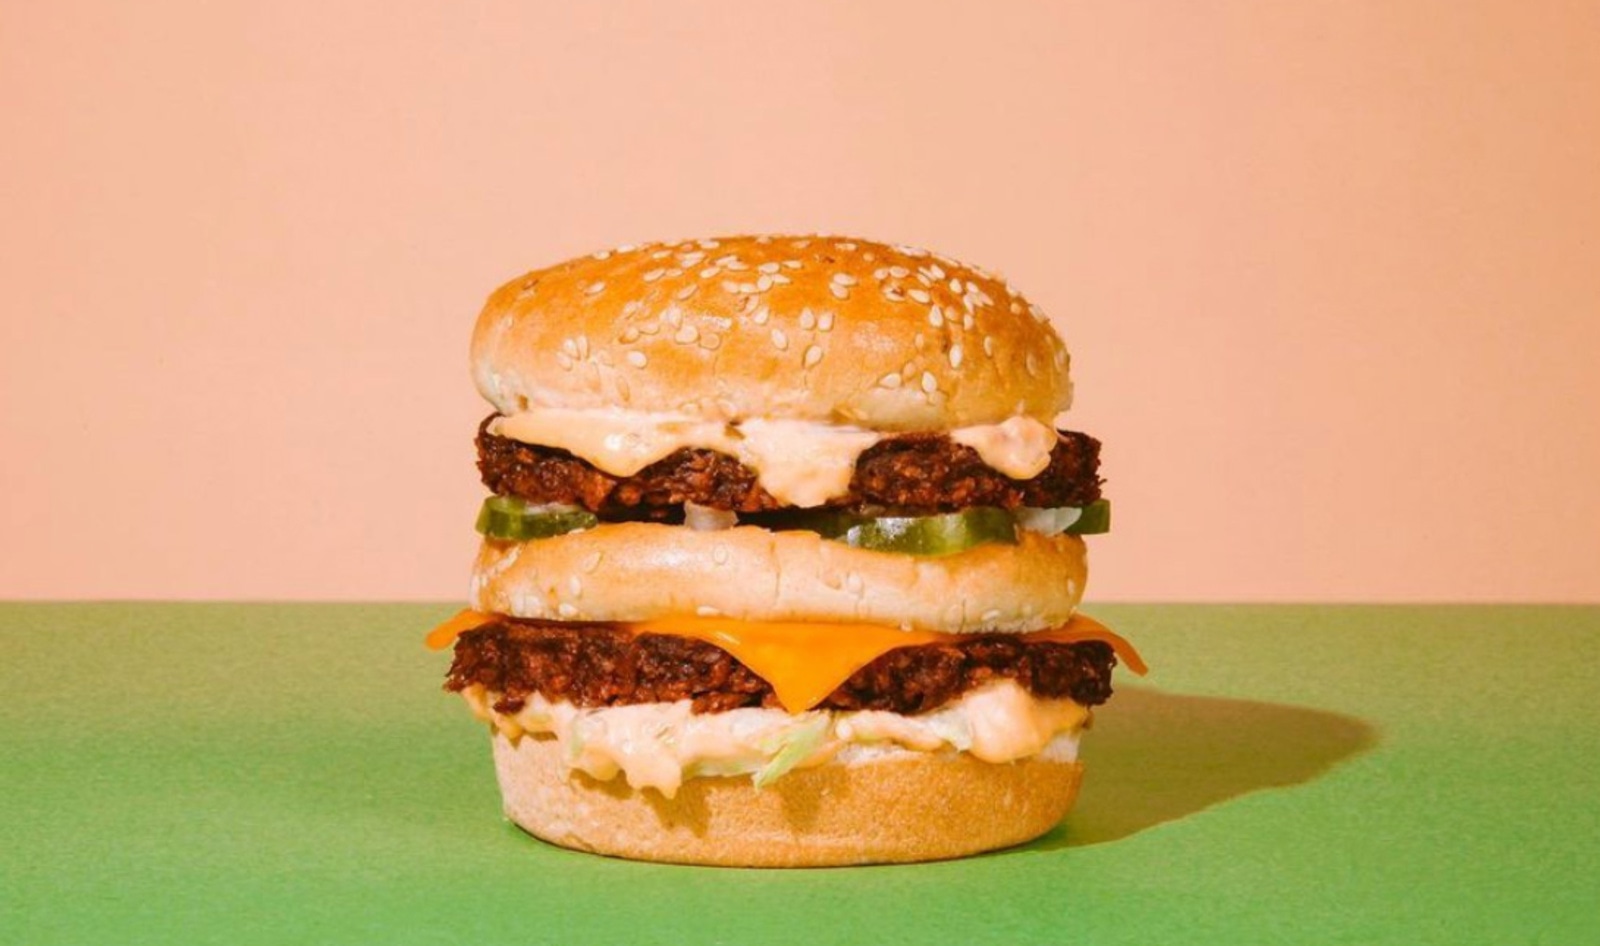 This Vegan Burger Chain Just Raised $7.5 Million to Open Its First Drive-Thru Outside of California